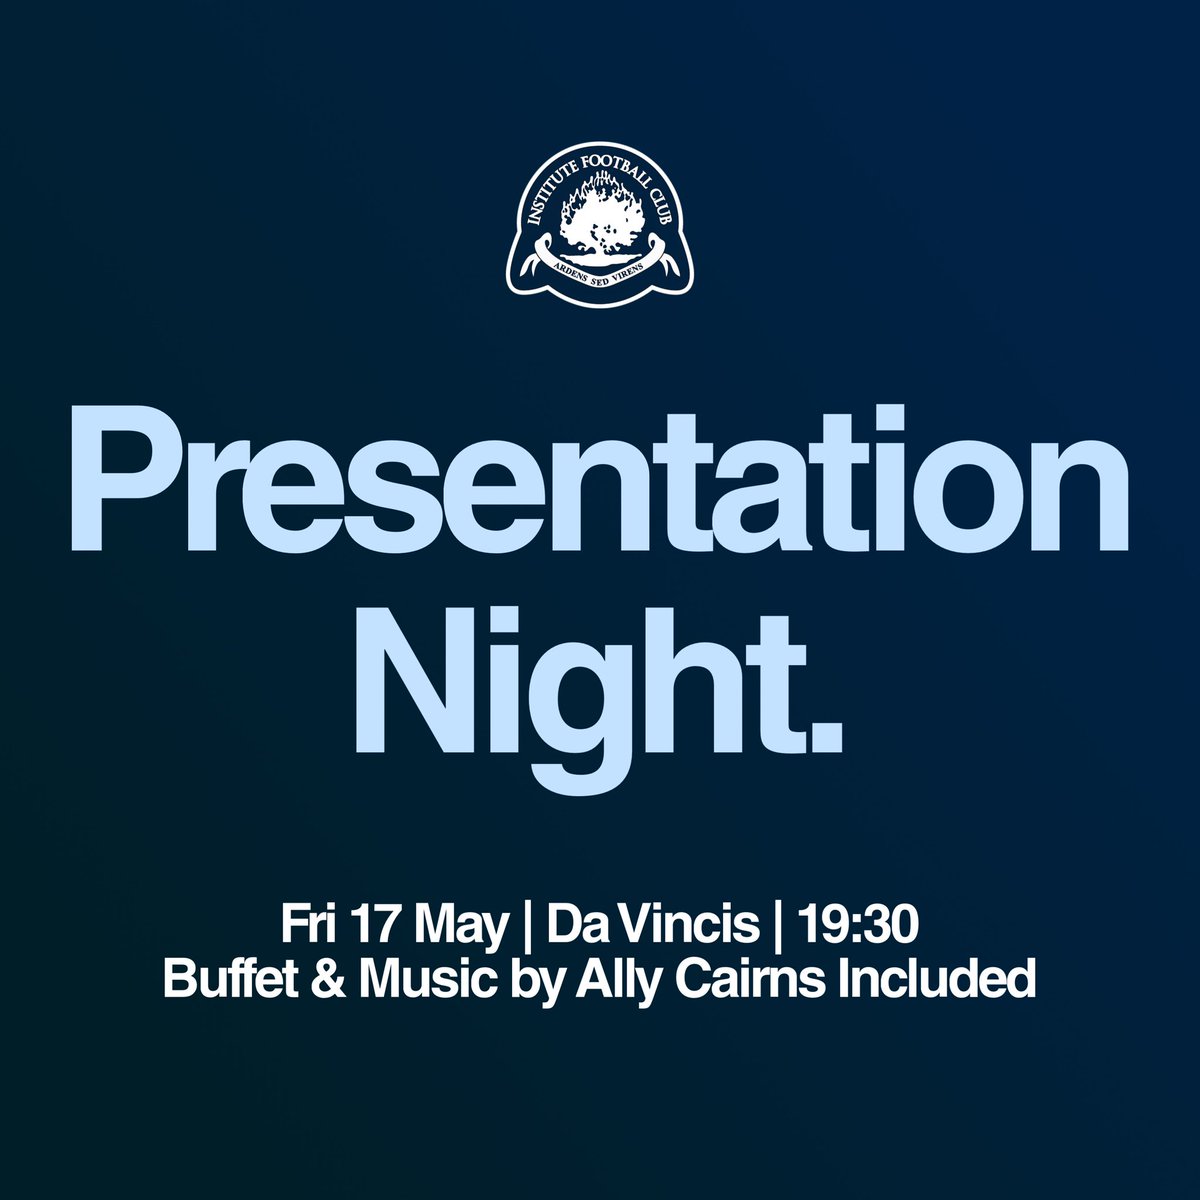 End of Season presentation in Da Vinci’s on Friday the 17th May at 7.30pm. Tickets are £25pp and to book a place please contact Nicky on 07858 097290. Everyone welcome #stute